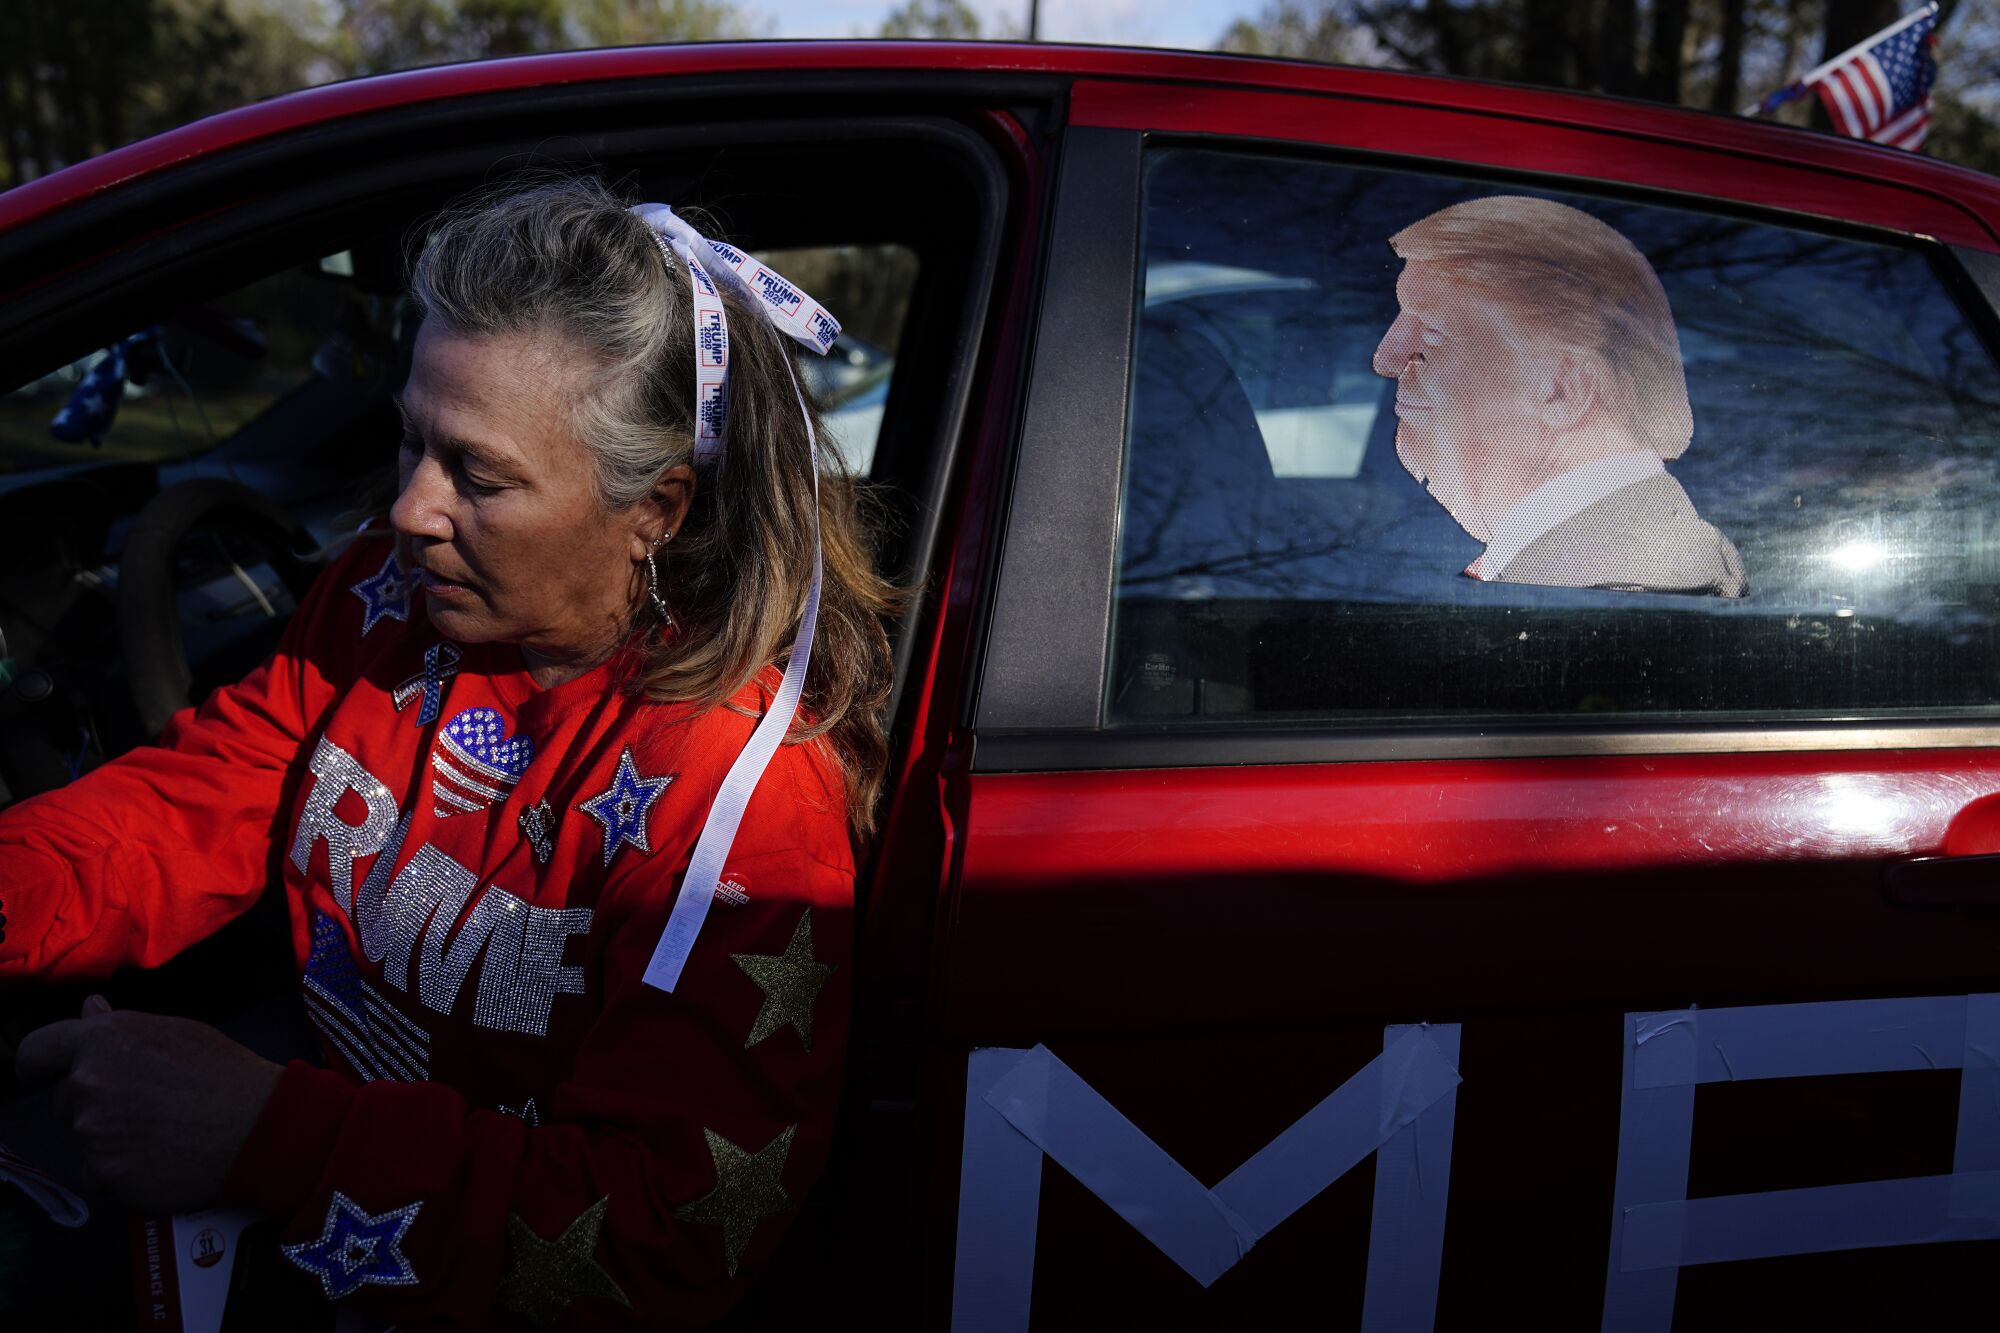 A woman with a red shirt with the word "Trump" in glitter gets out of a car, an image of Trump on one window.